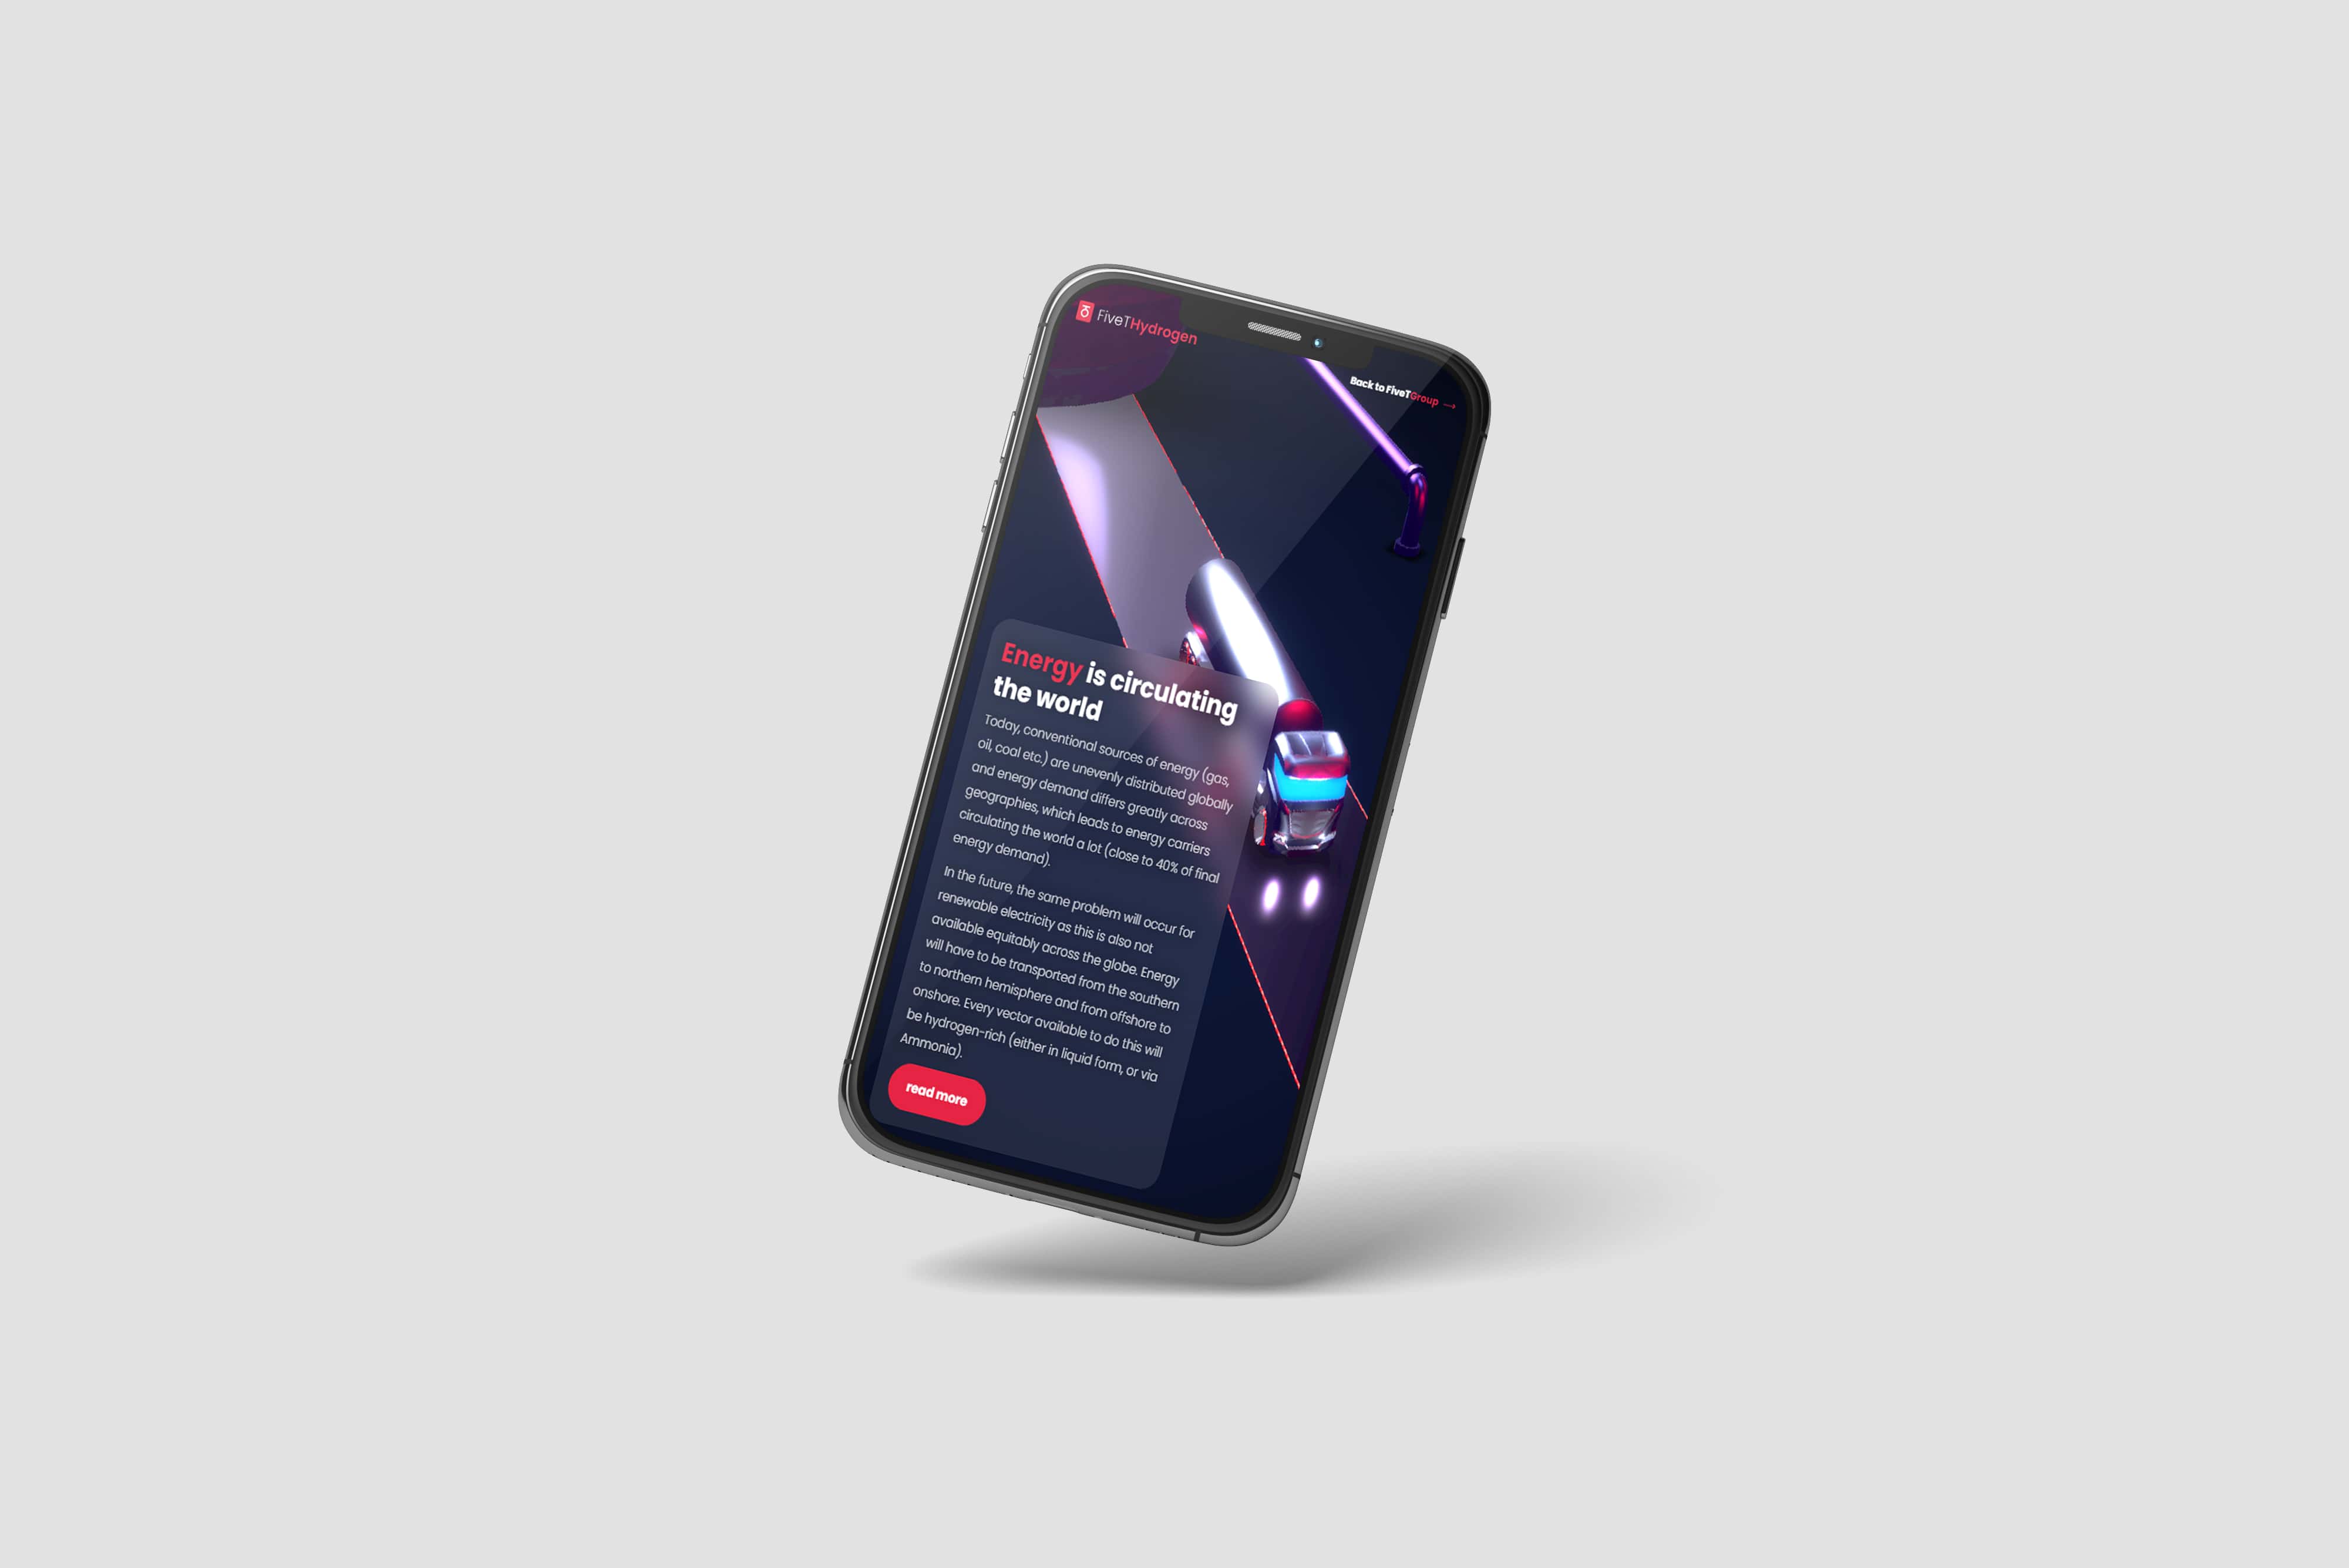 This mock-up image shows the interactive website design on mobile phone with three.JS for FiveT Hydrogen focussing on how energy is circulating the world